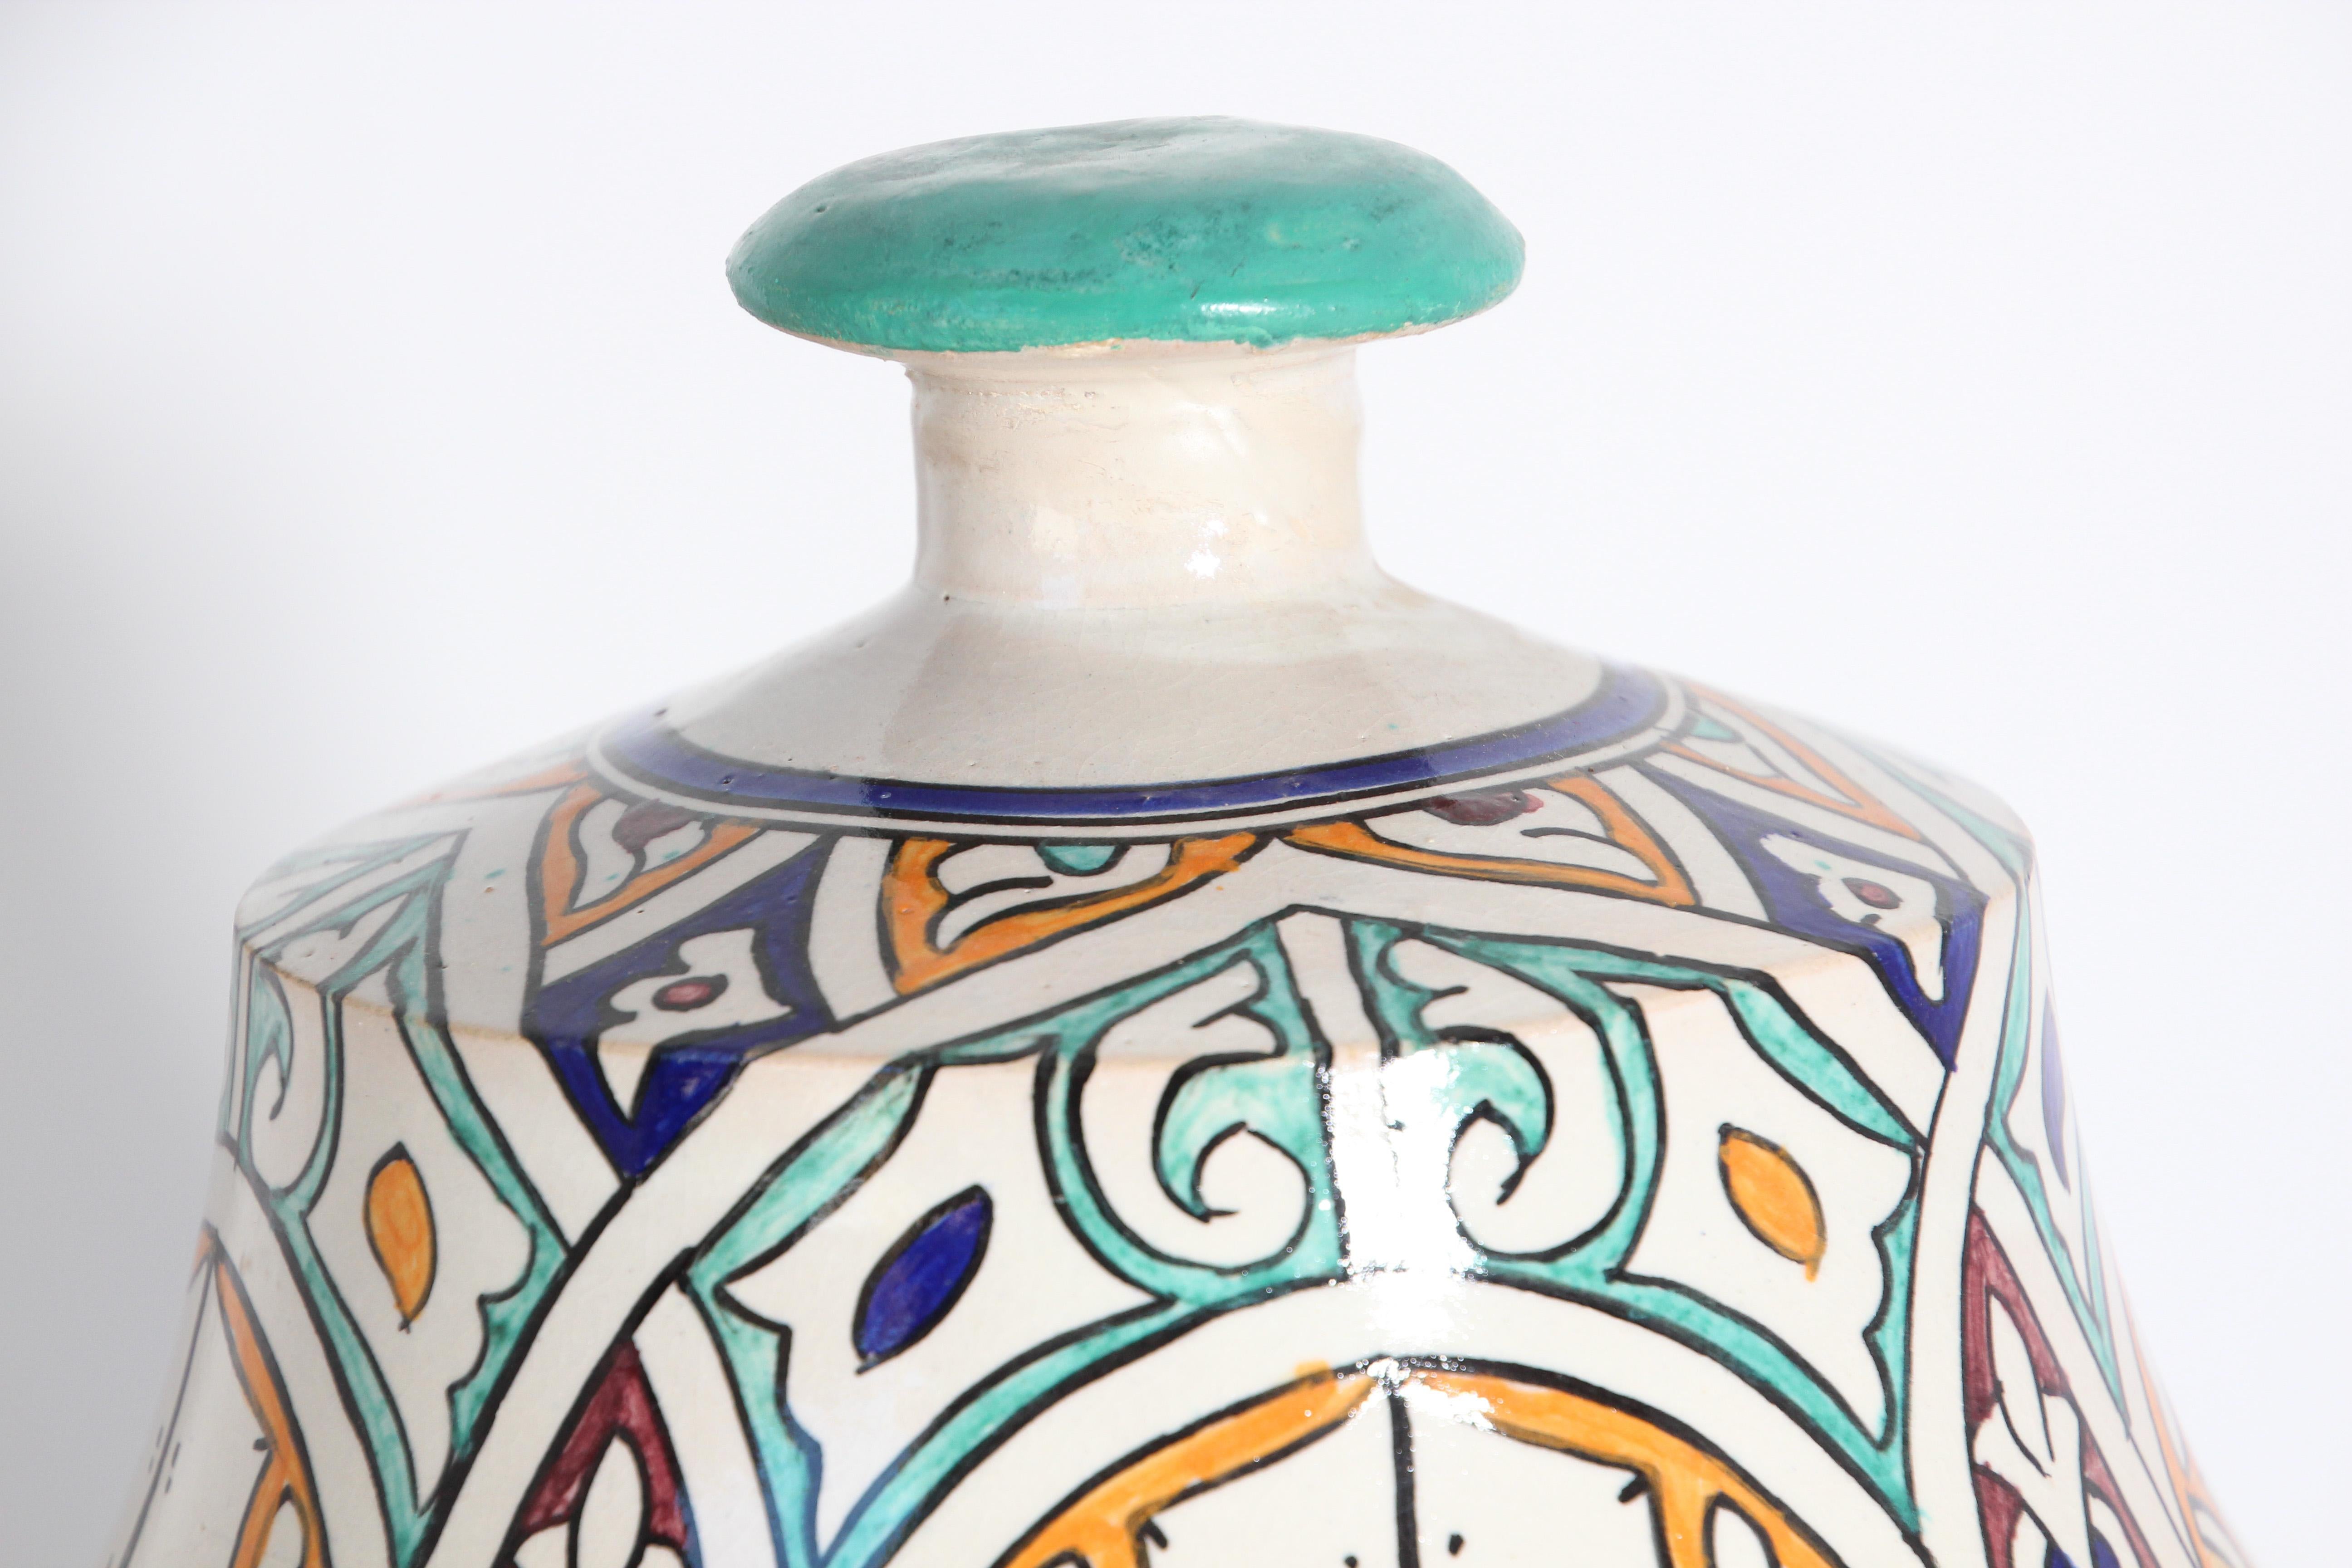 moroccan pottery for sale